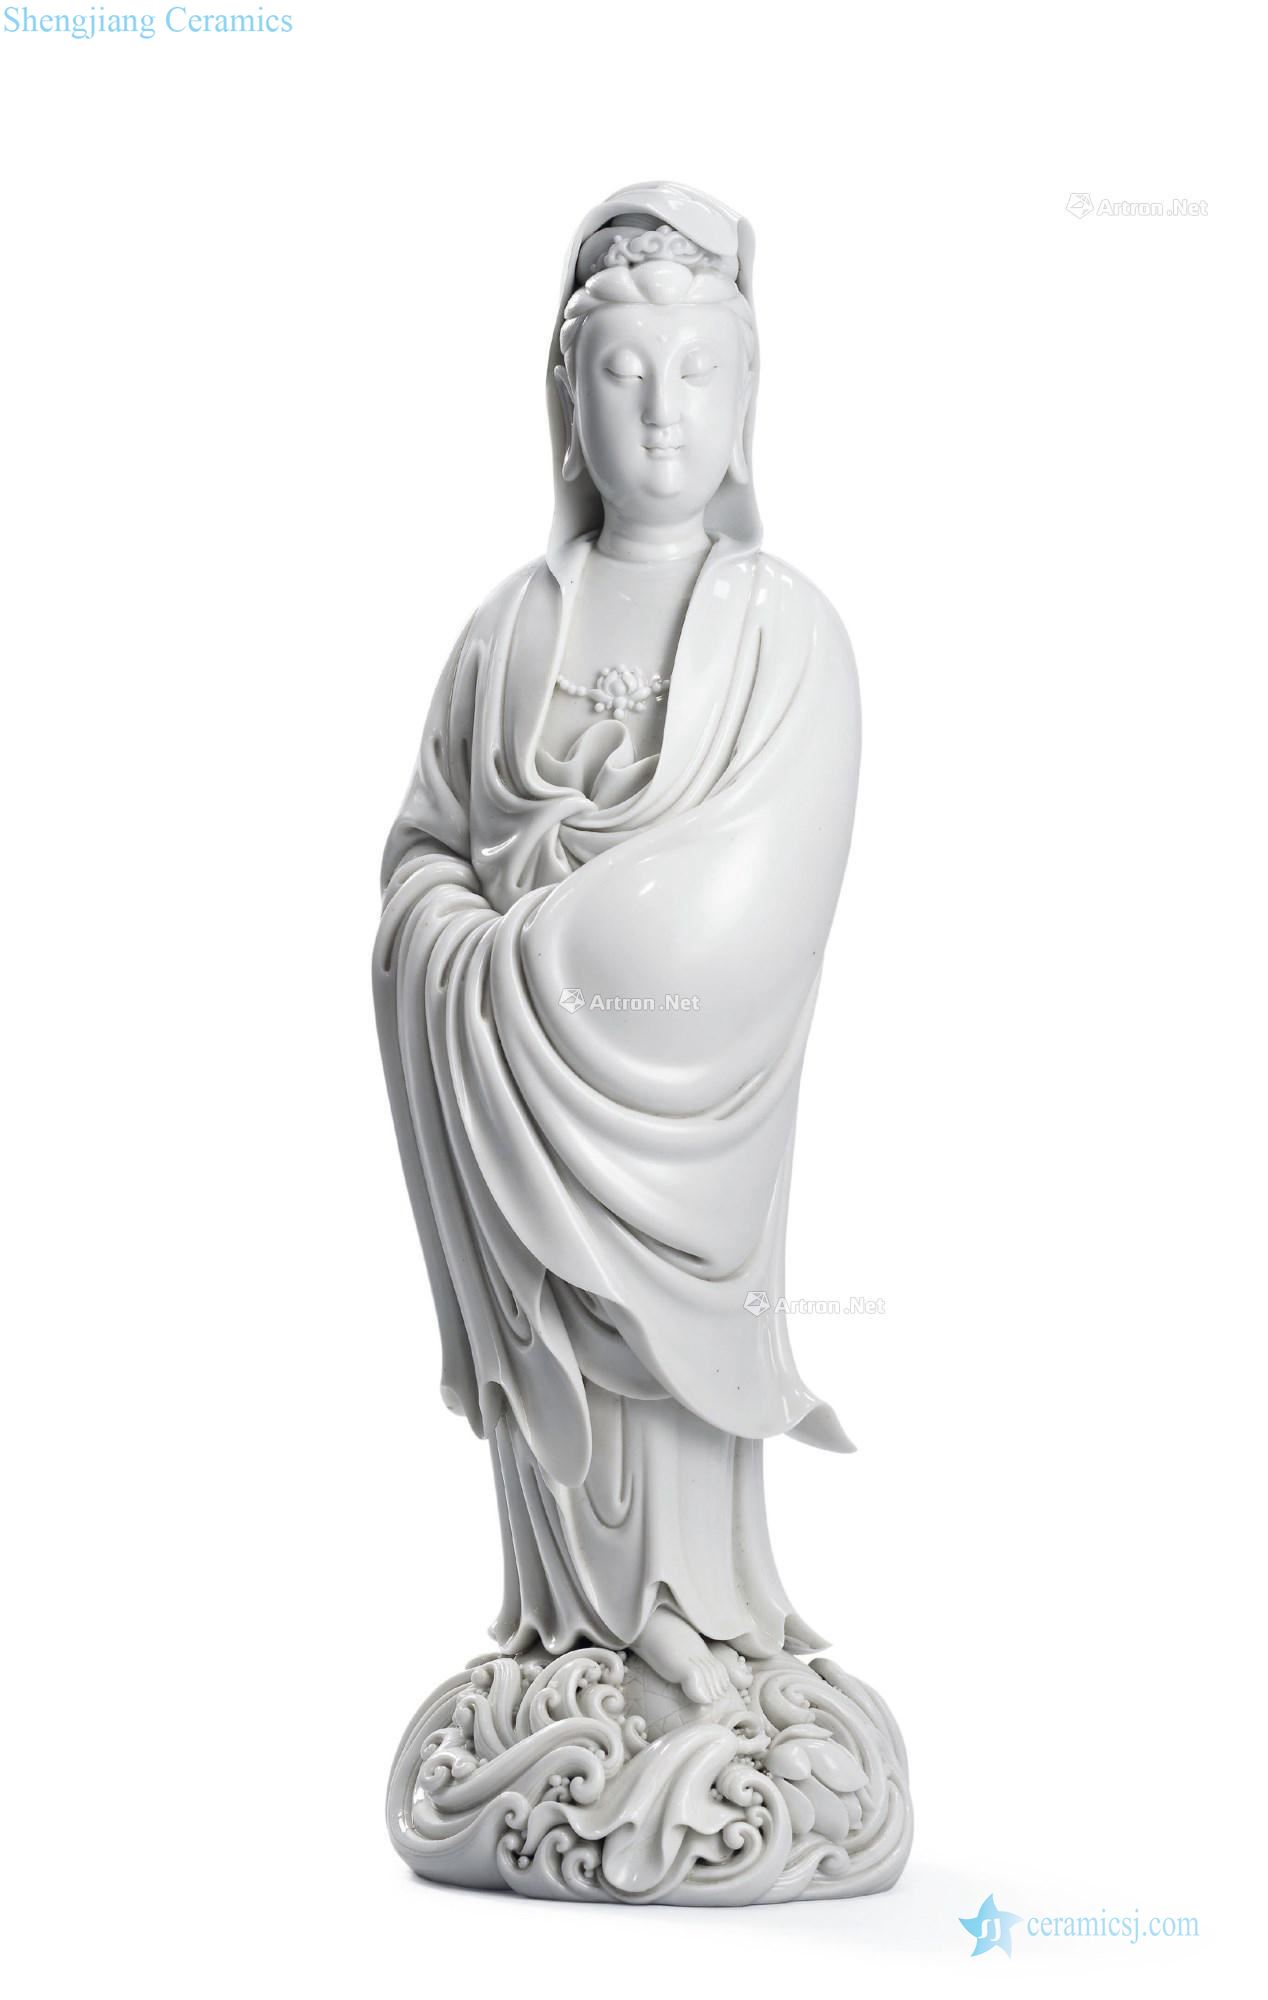 Ming in the 16th century; In the 17th century dehua white glaze across the sea goddess of mercy stands resemble